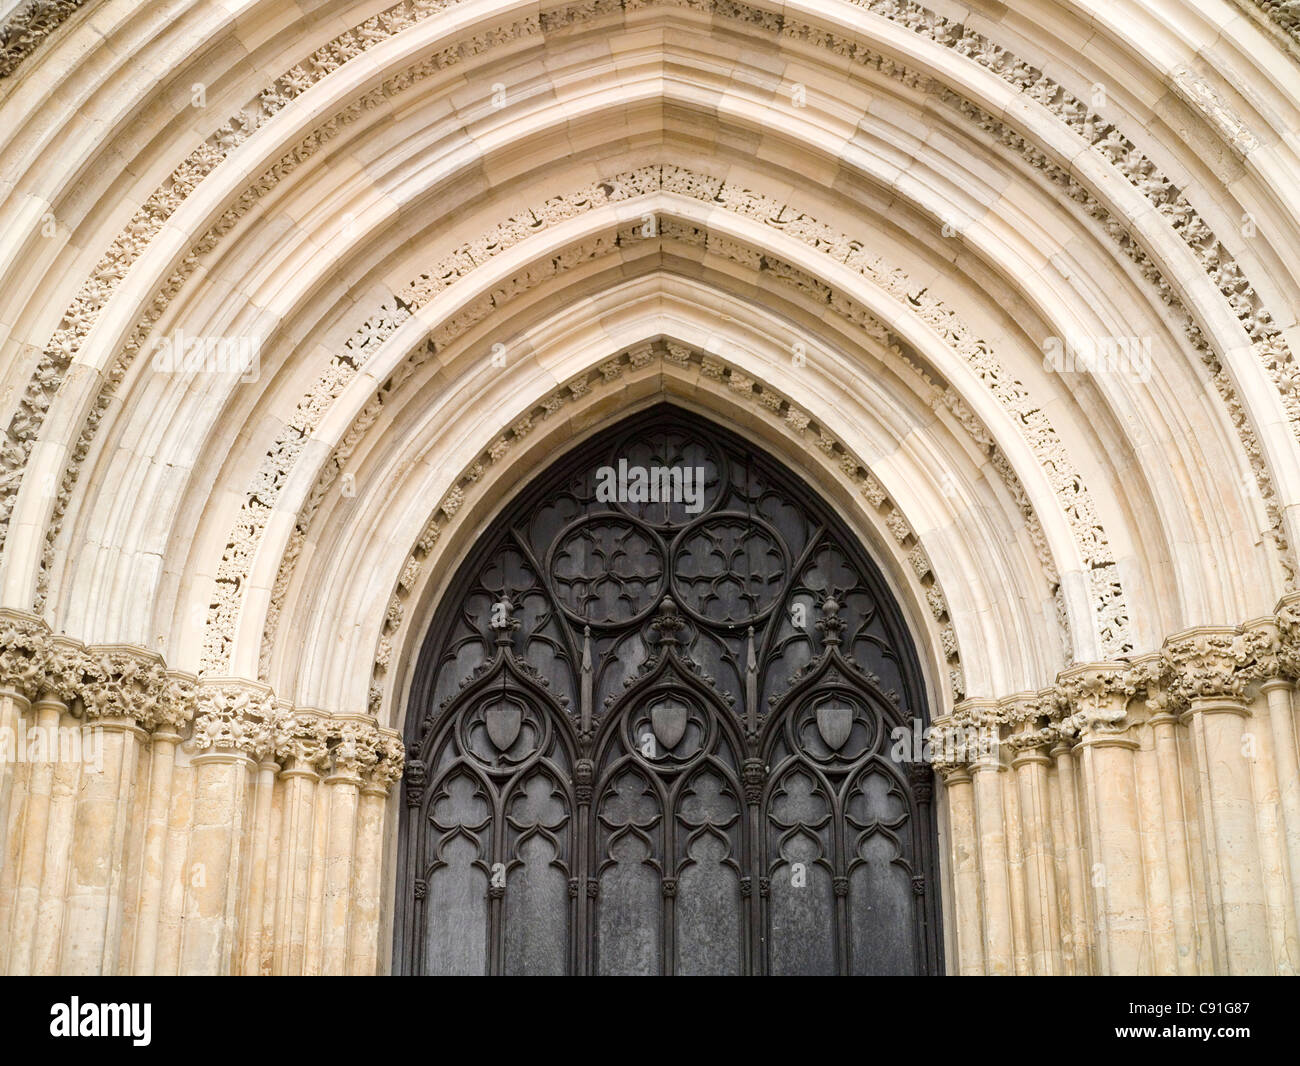 York Minster's fine architecture houses an amazing array of arched entrances and doors, typical of the grand Norman style. Stock Photo